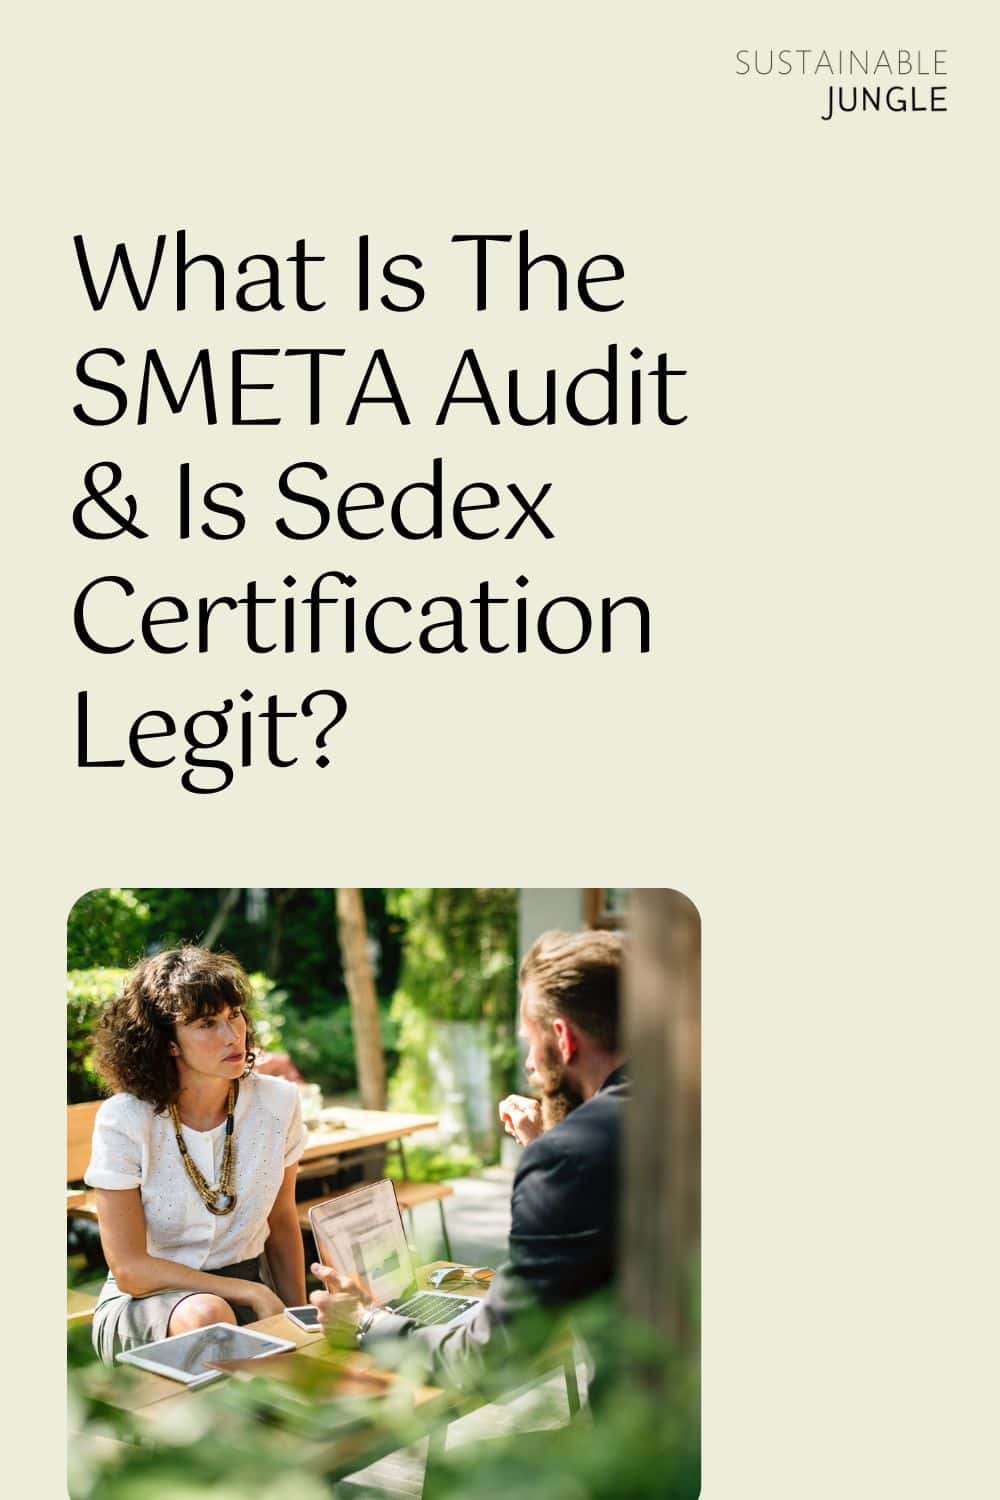 What Is The SMETA Audit & Is Sedex Certification Legit? Image by Sedex #SMETAaudit #SMETAauditchecklist #sedexcertification #whatissedexcertification #sedexcertified #SMETAcertification #sustainablejungle